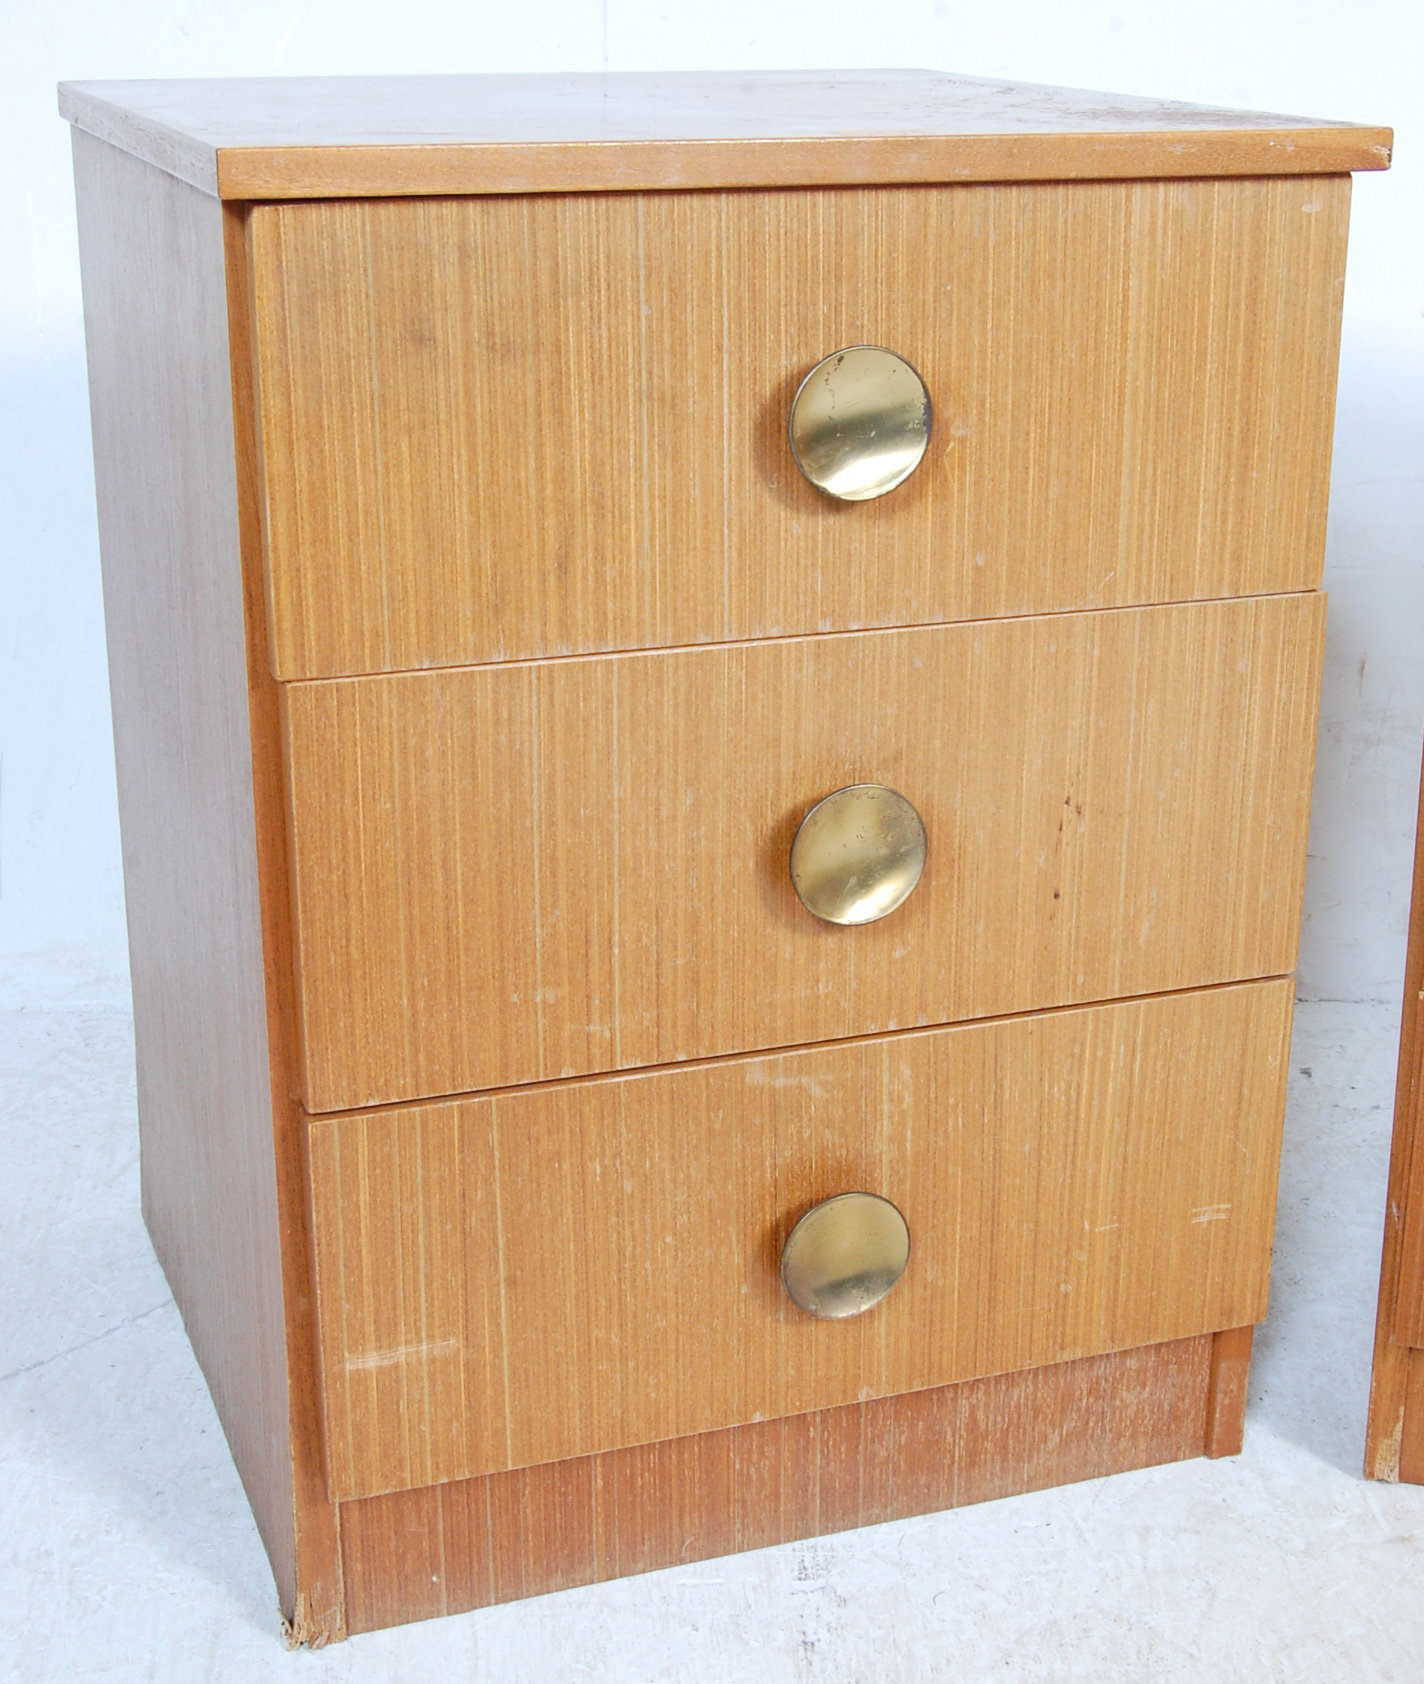 MID CENTURY RETRO TEAK WOOD BEDSIDE CHESTS OF DRAWERS - Image 3 of 7